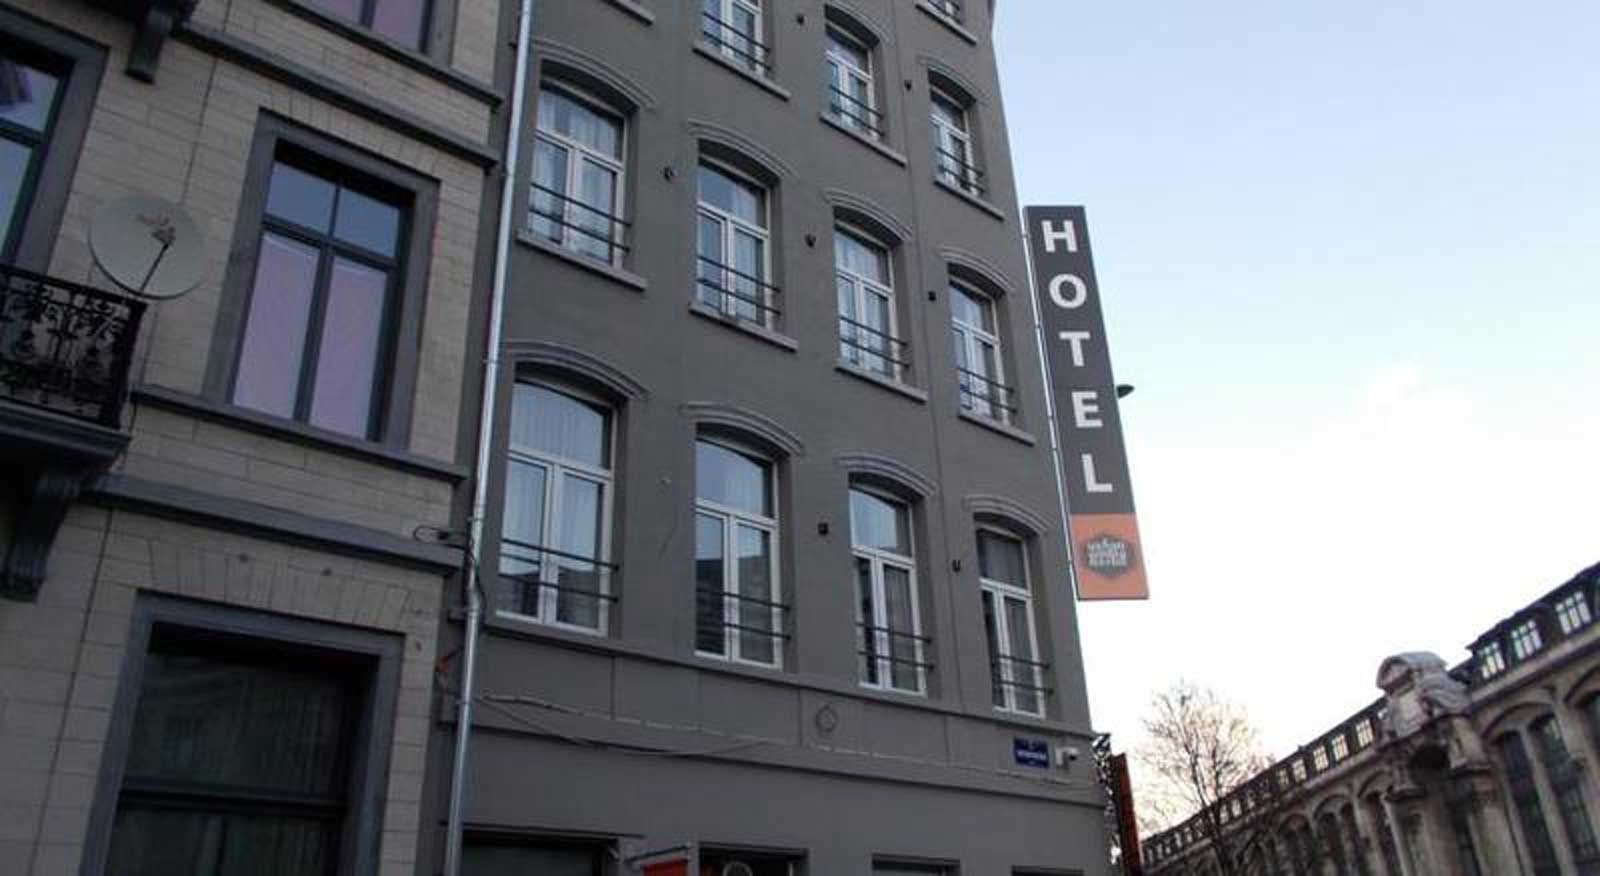 Urban City Centre Hostel is one of the best hostels in Brussels